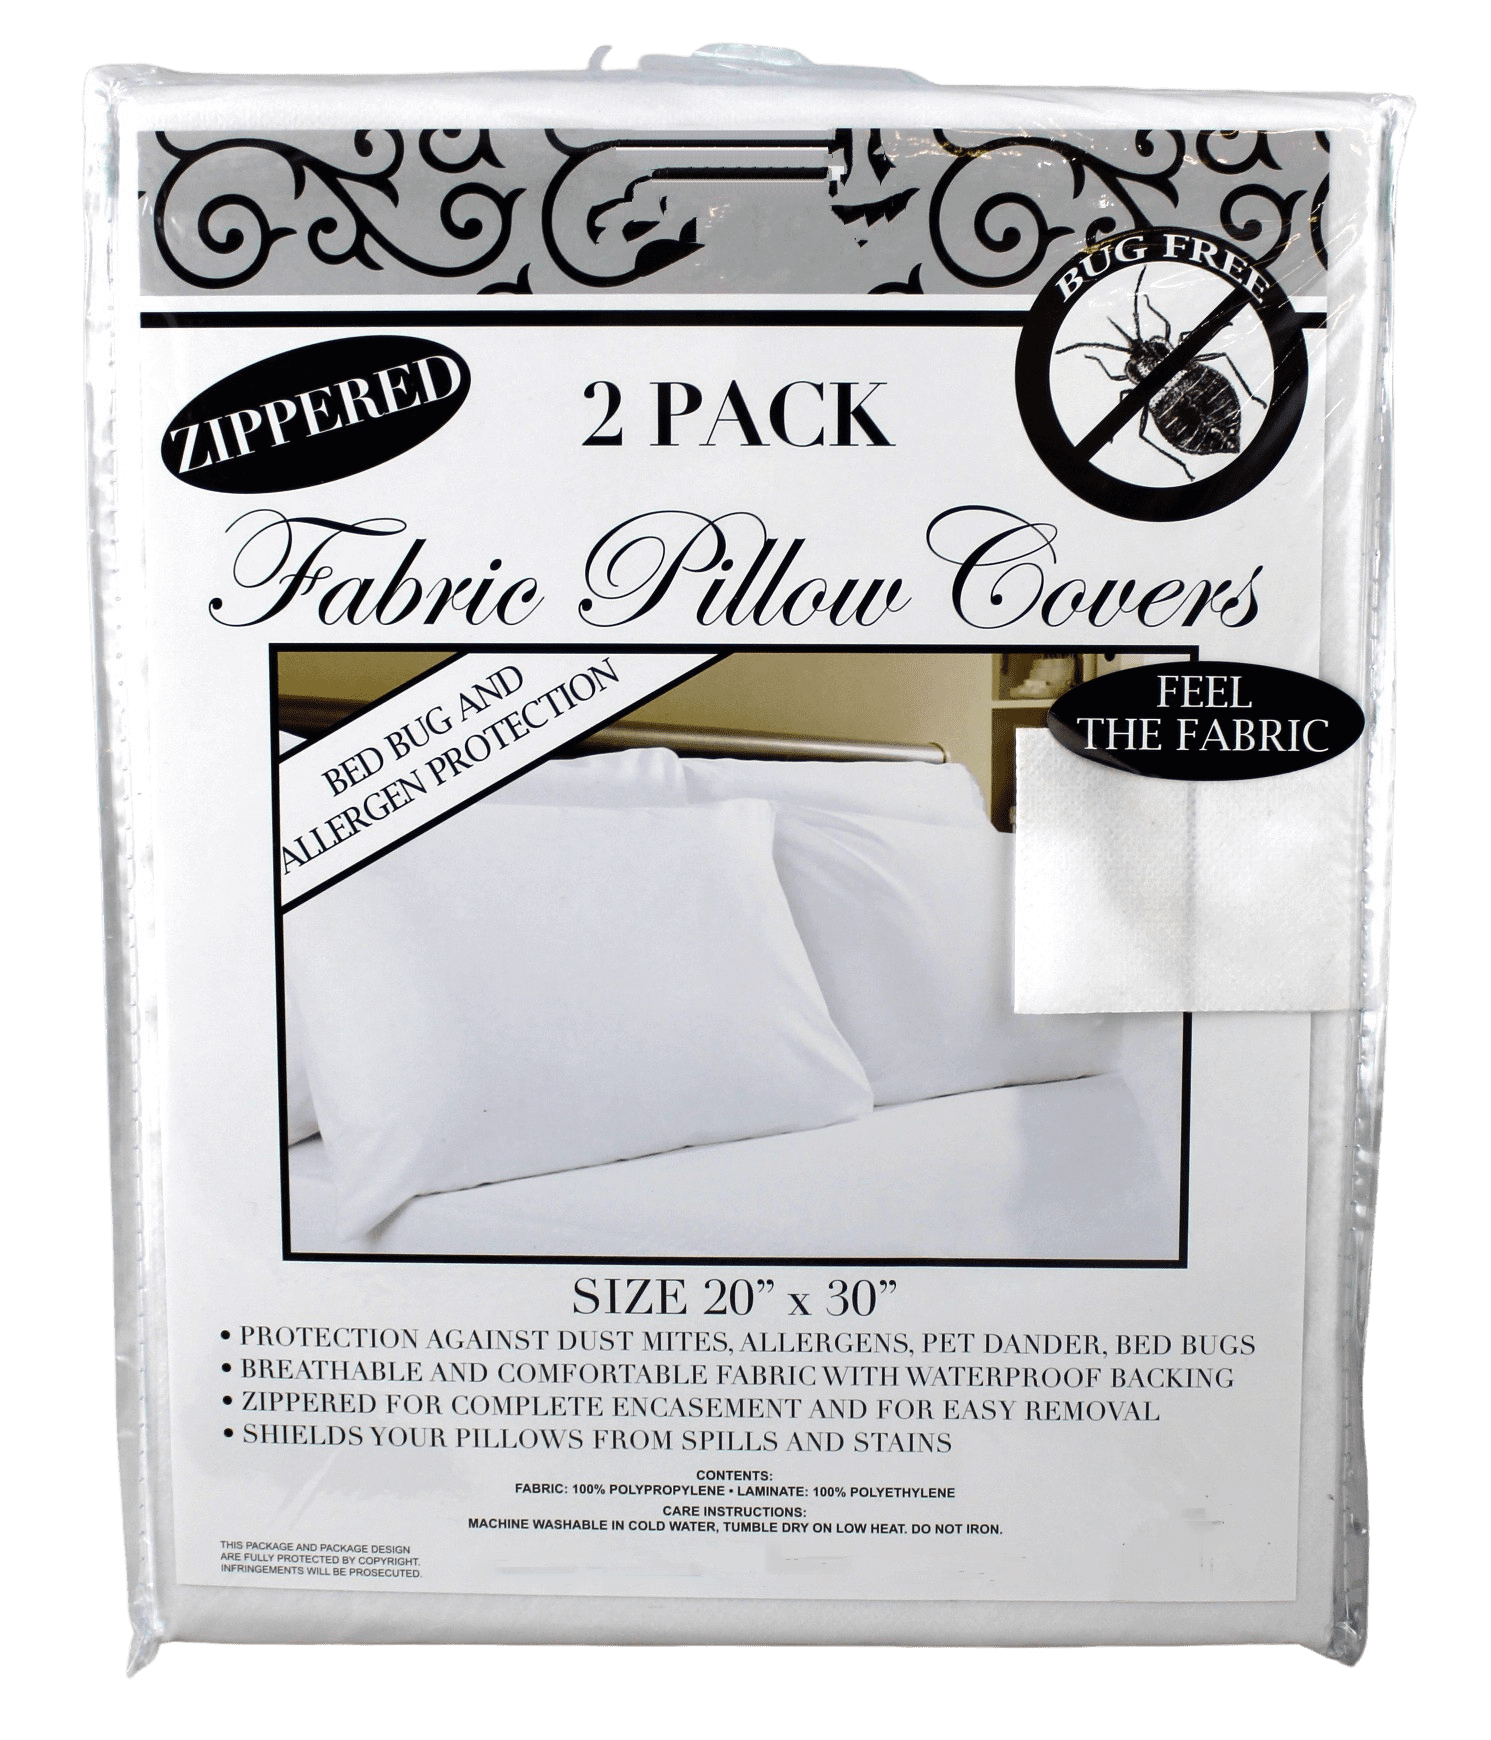 2 King Size Deluxe Zippered Fabric Pillow Covers Protects Against Bed Bugs 